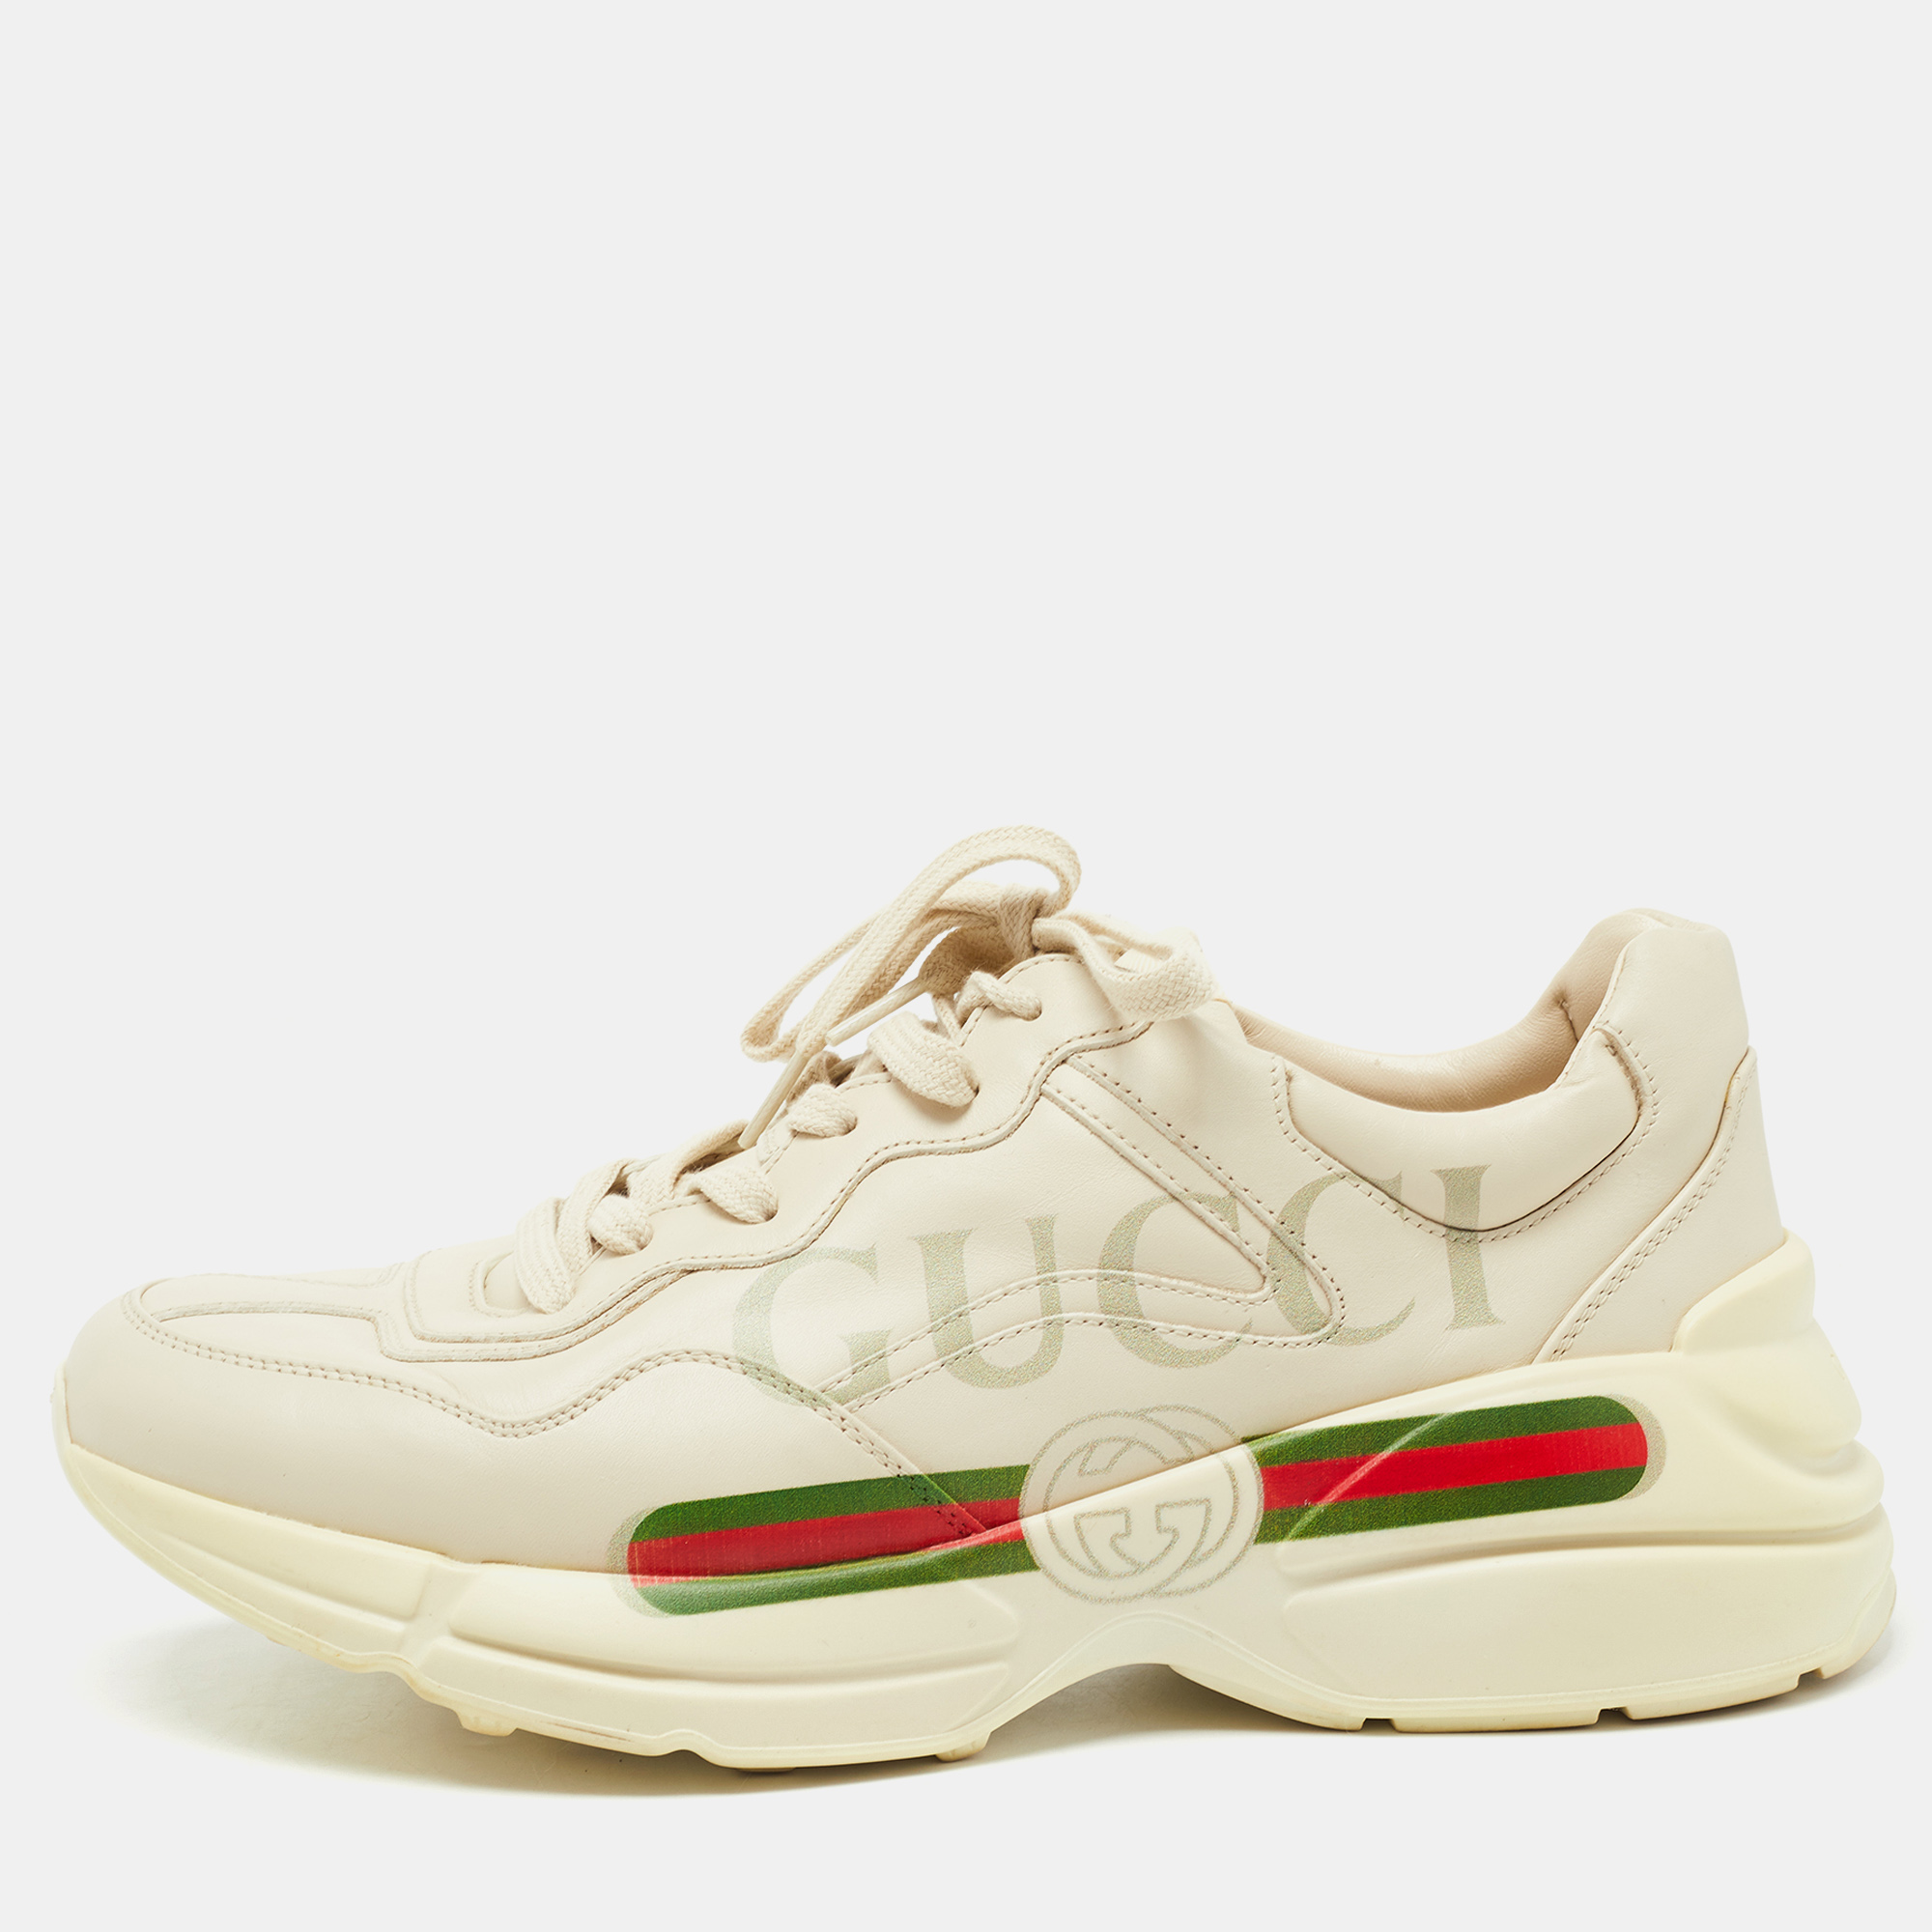 Gucci Cream Leather Rhyton Lace Up Sneakers Size 42 Gucci | The Luxury ...